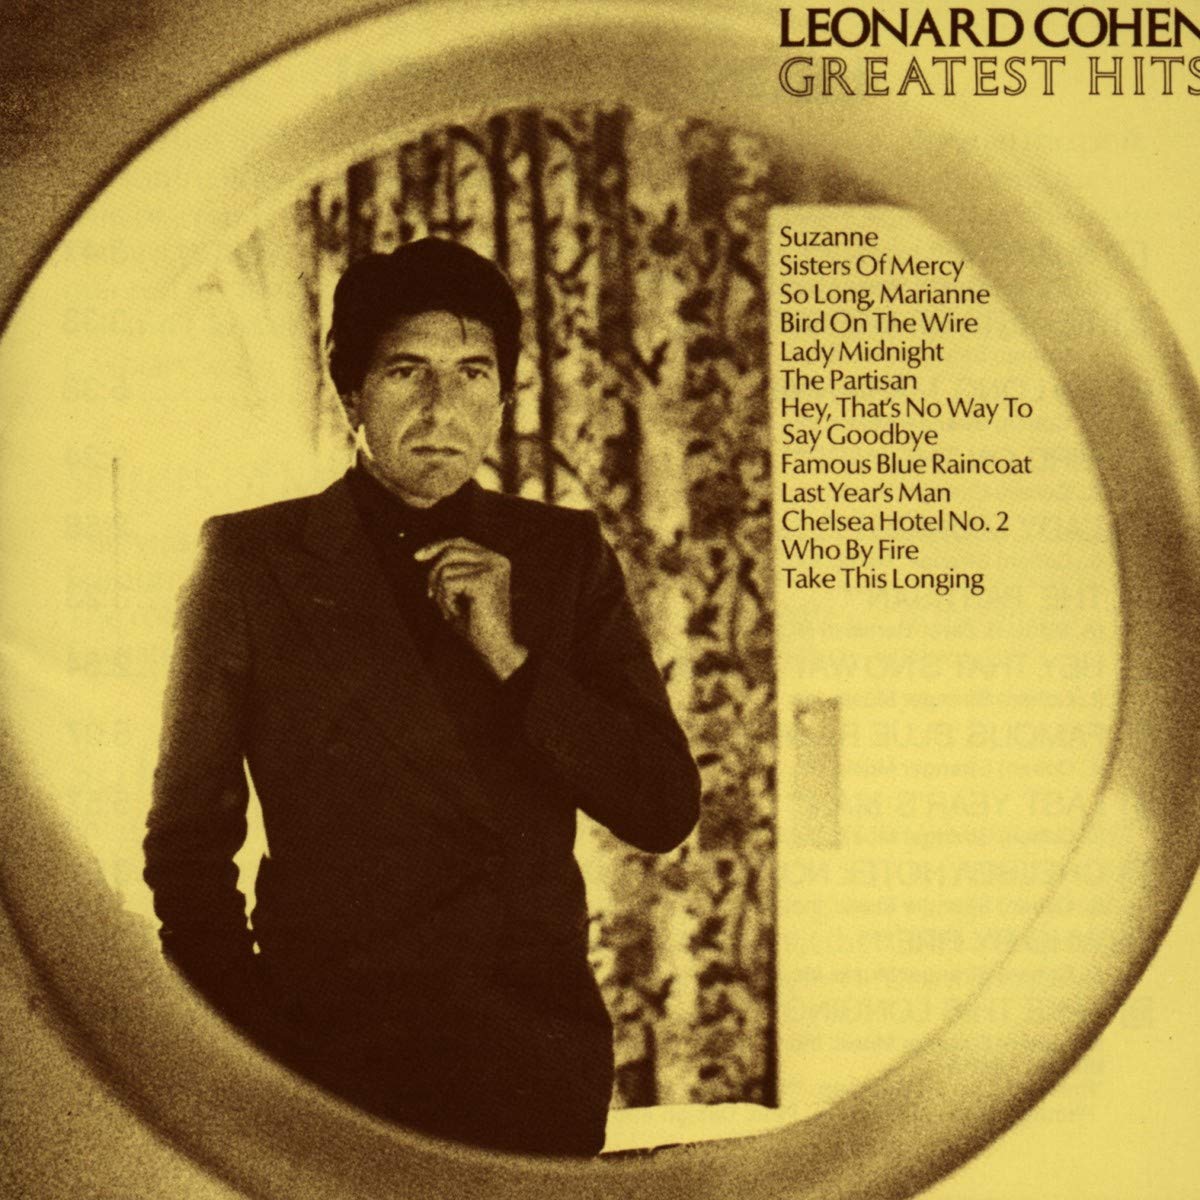 Leonard Cohen's Greatest Hits cover shows photo of Cohen in mirror, and in a pose that seems to mimic a photo of my aunt